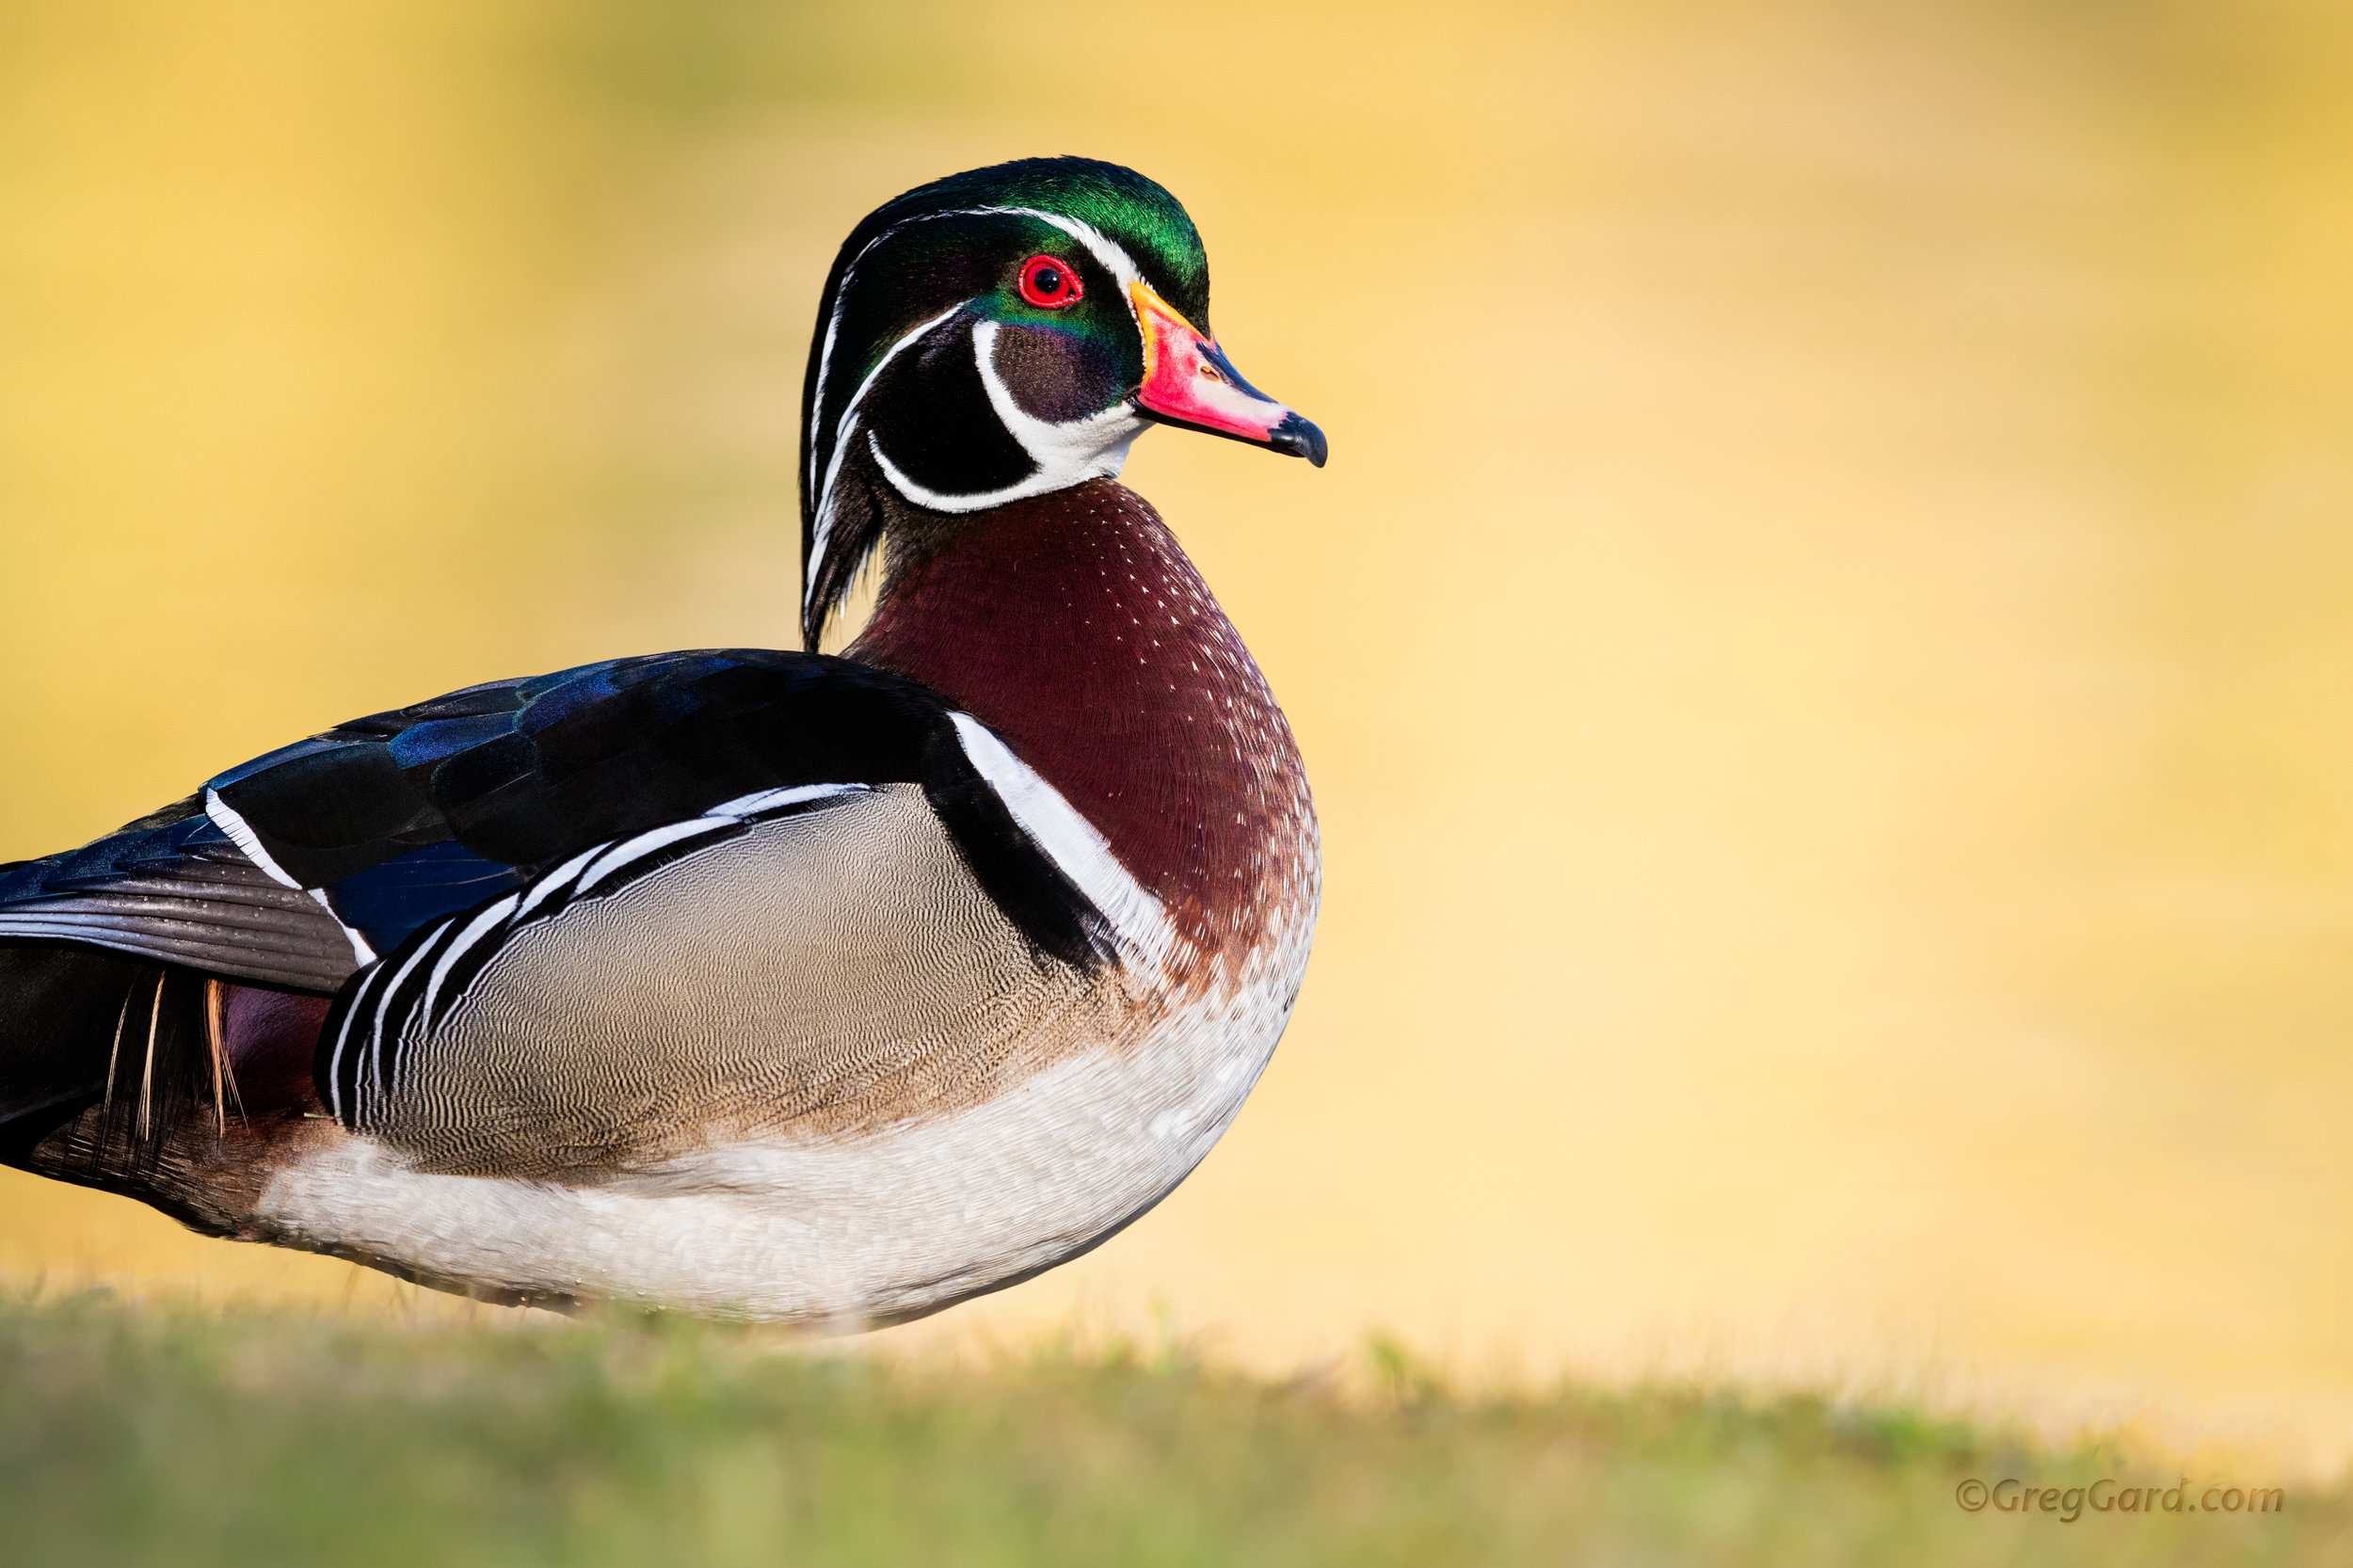  Adult male Wood Duck standing on a grass at the edge of a lake in Northern New Jersey

Photograph captured with a Canon EOS 5DsR camera paired with a Canon 600mm f/4 IS II lens and 1.4x extender, at 840mm, using following settings: 1/800 s, f/7.1, I